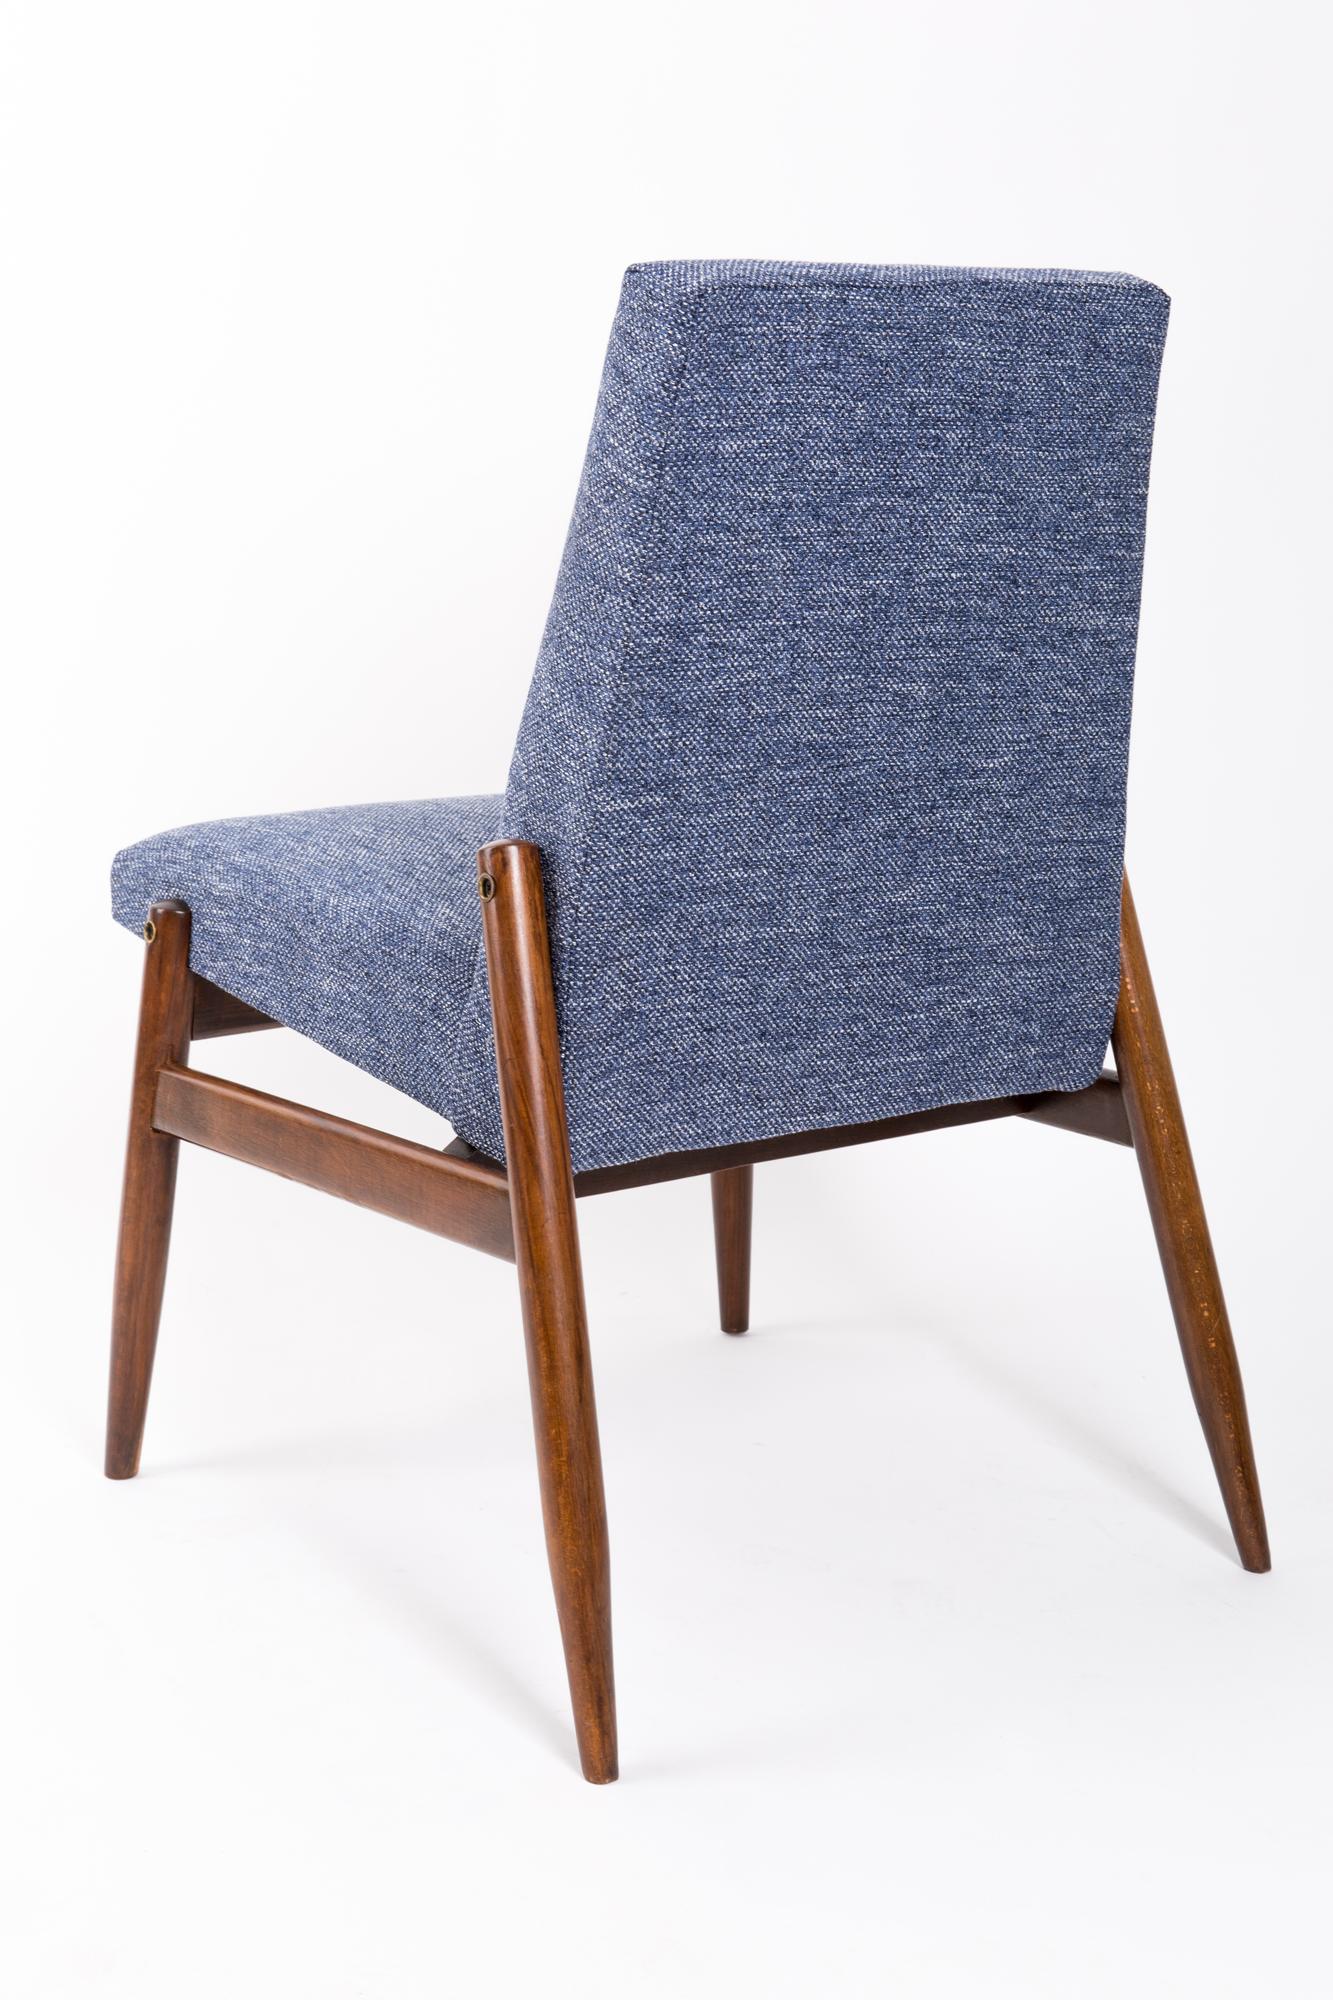 Polish Mid-Century Navy Blue Armchair, 300-227 Type, Europe, 1960s For Sale